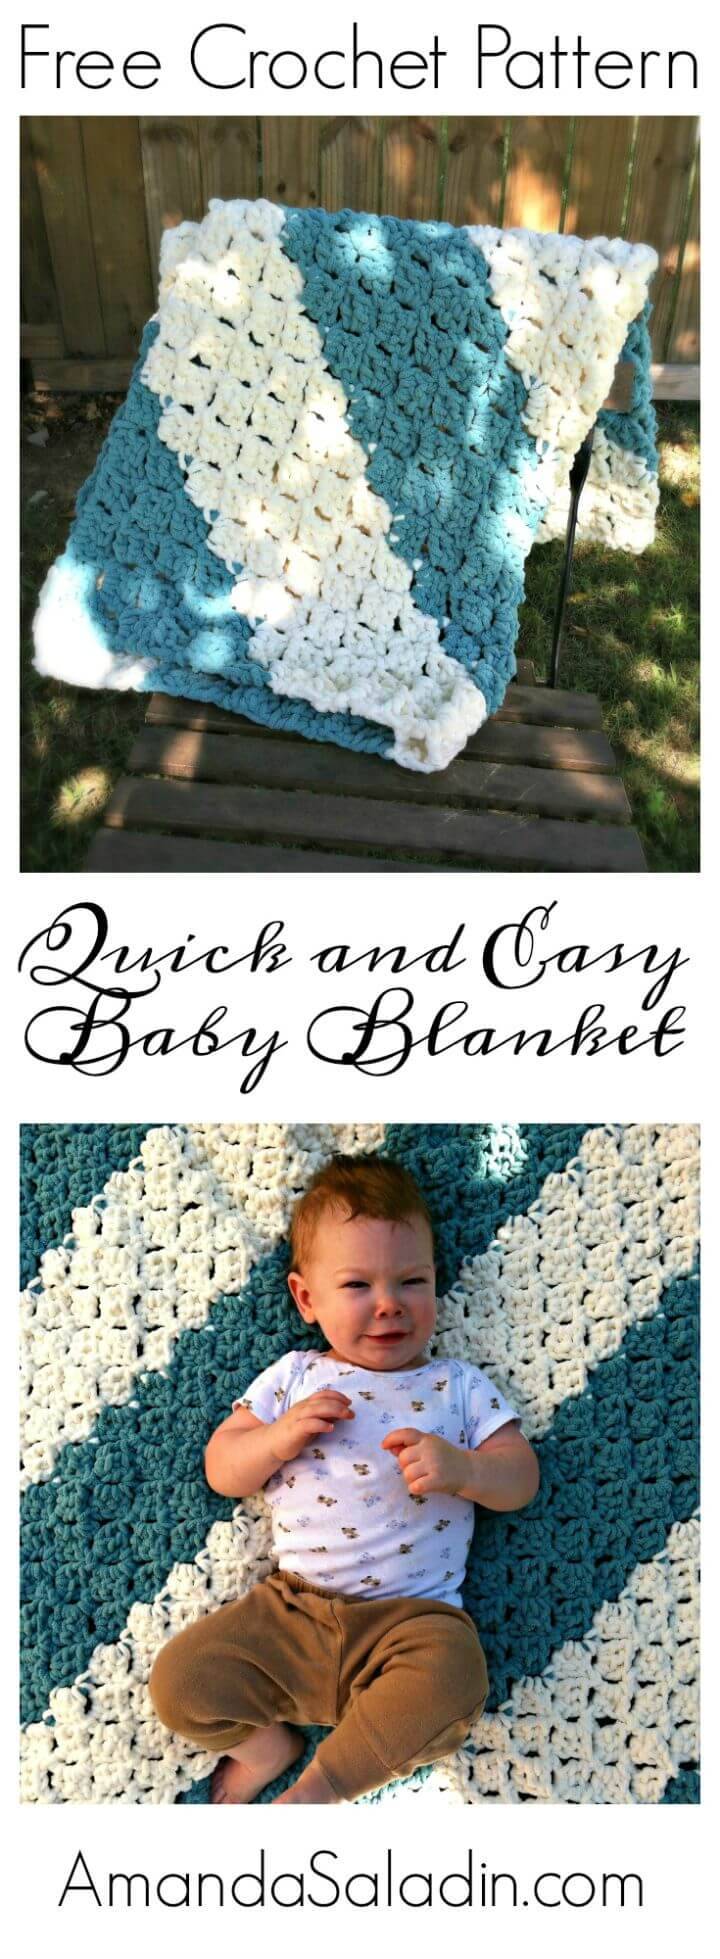 Quick and Easy Baby Blanket – Free Crochet Pattern